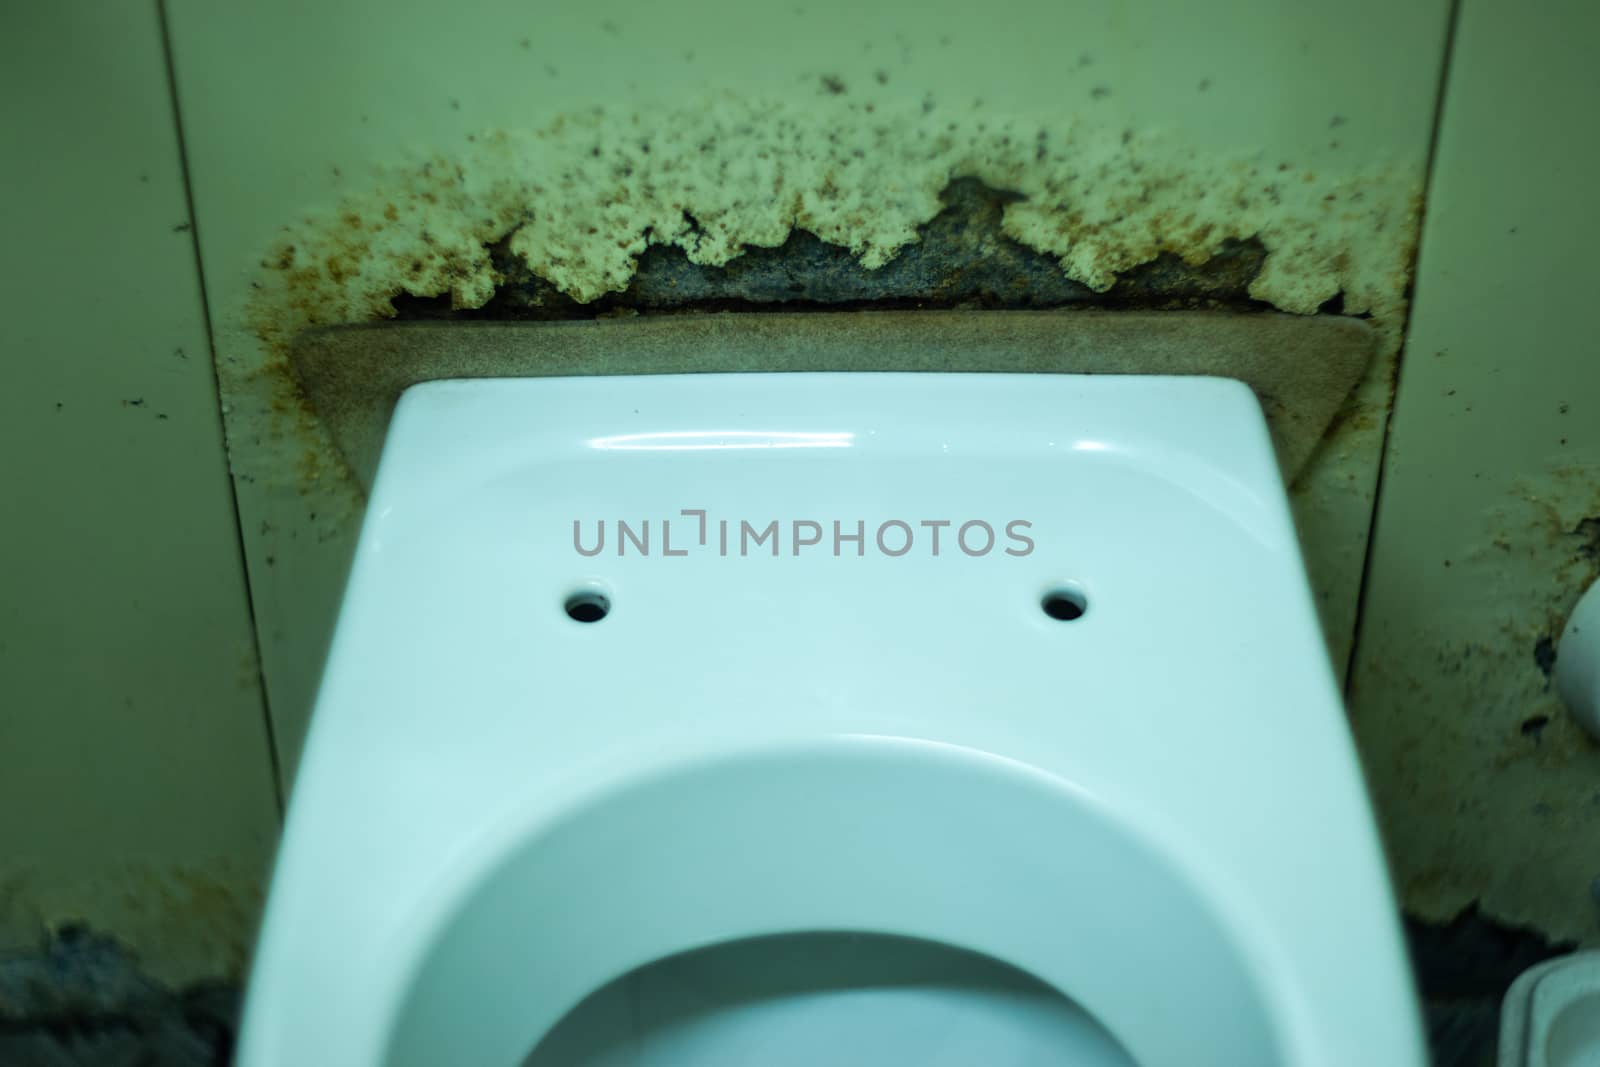 Dirty terrible toilet in a public toilet. Plating deteriorated from moisture and urine